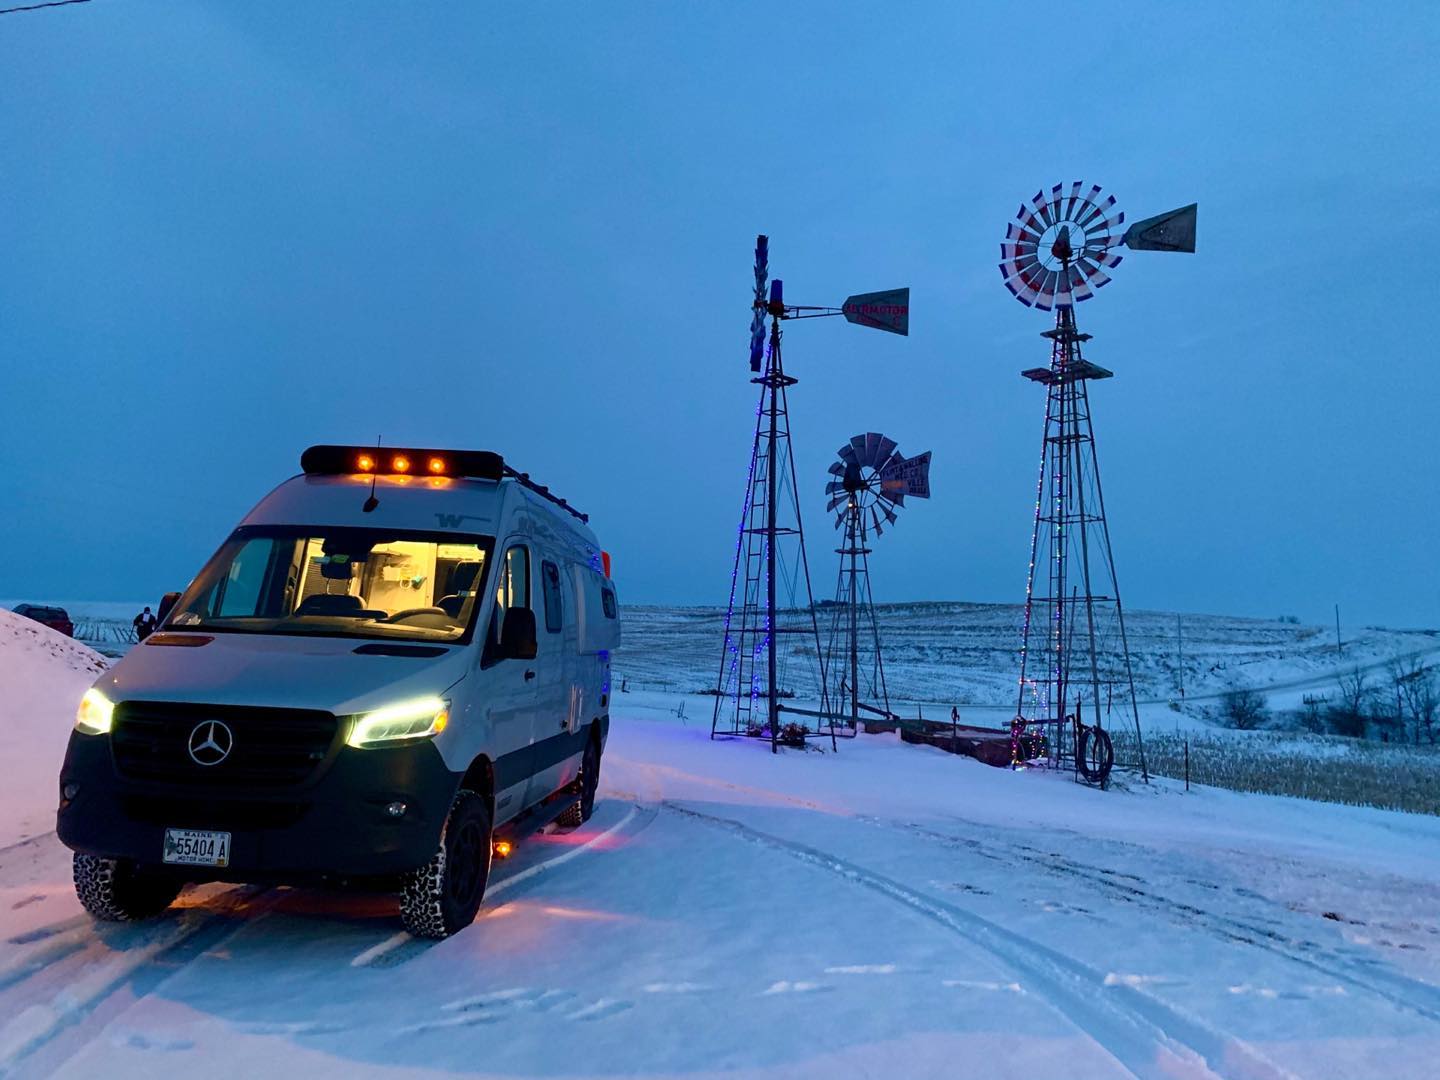 Day Four, we pulled in to Windmill Acres, located in Ndola, Iowa close to the Nebraska line. The Harvest Host proprietor, Mike Gibbs greeted us with a blazing fire pit, snack tray and hot mulled wine. Quite a treat! #harvesthosts #4x4sprintervan #vanlife #windmill acres #orcuttphotography #lifeontheroad #gnarvan